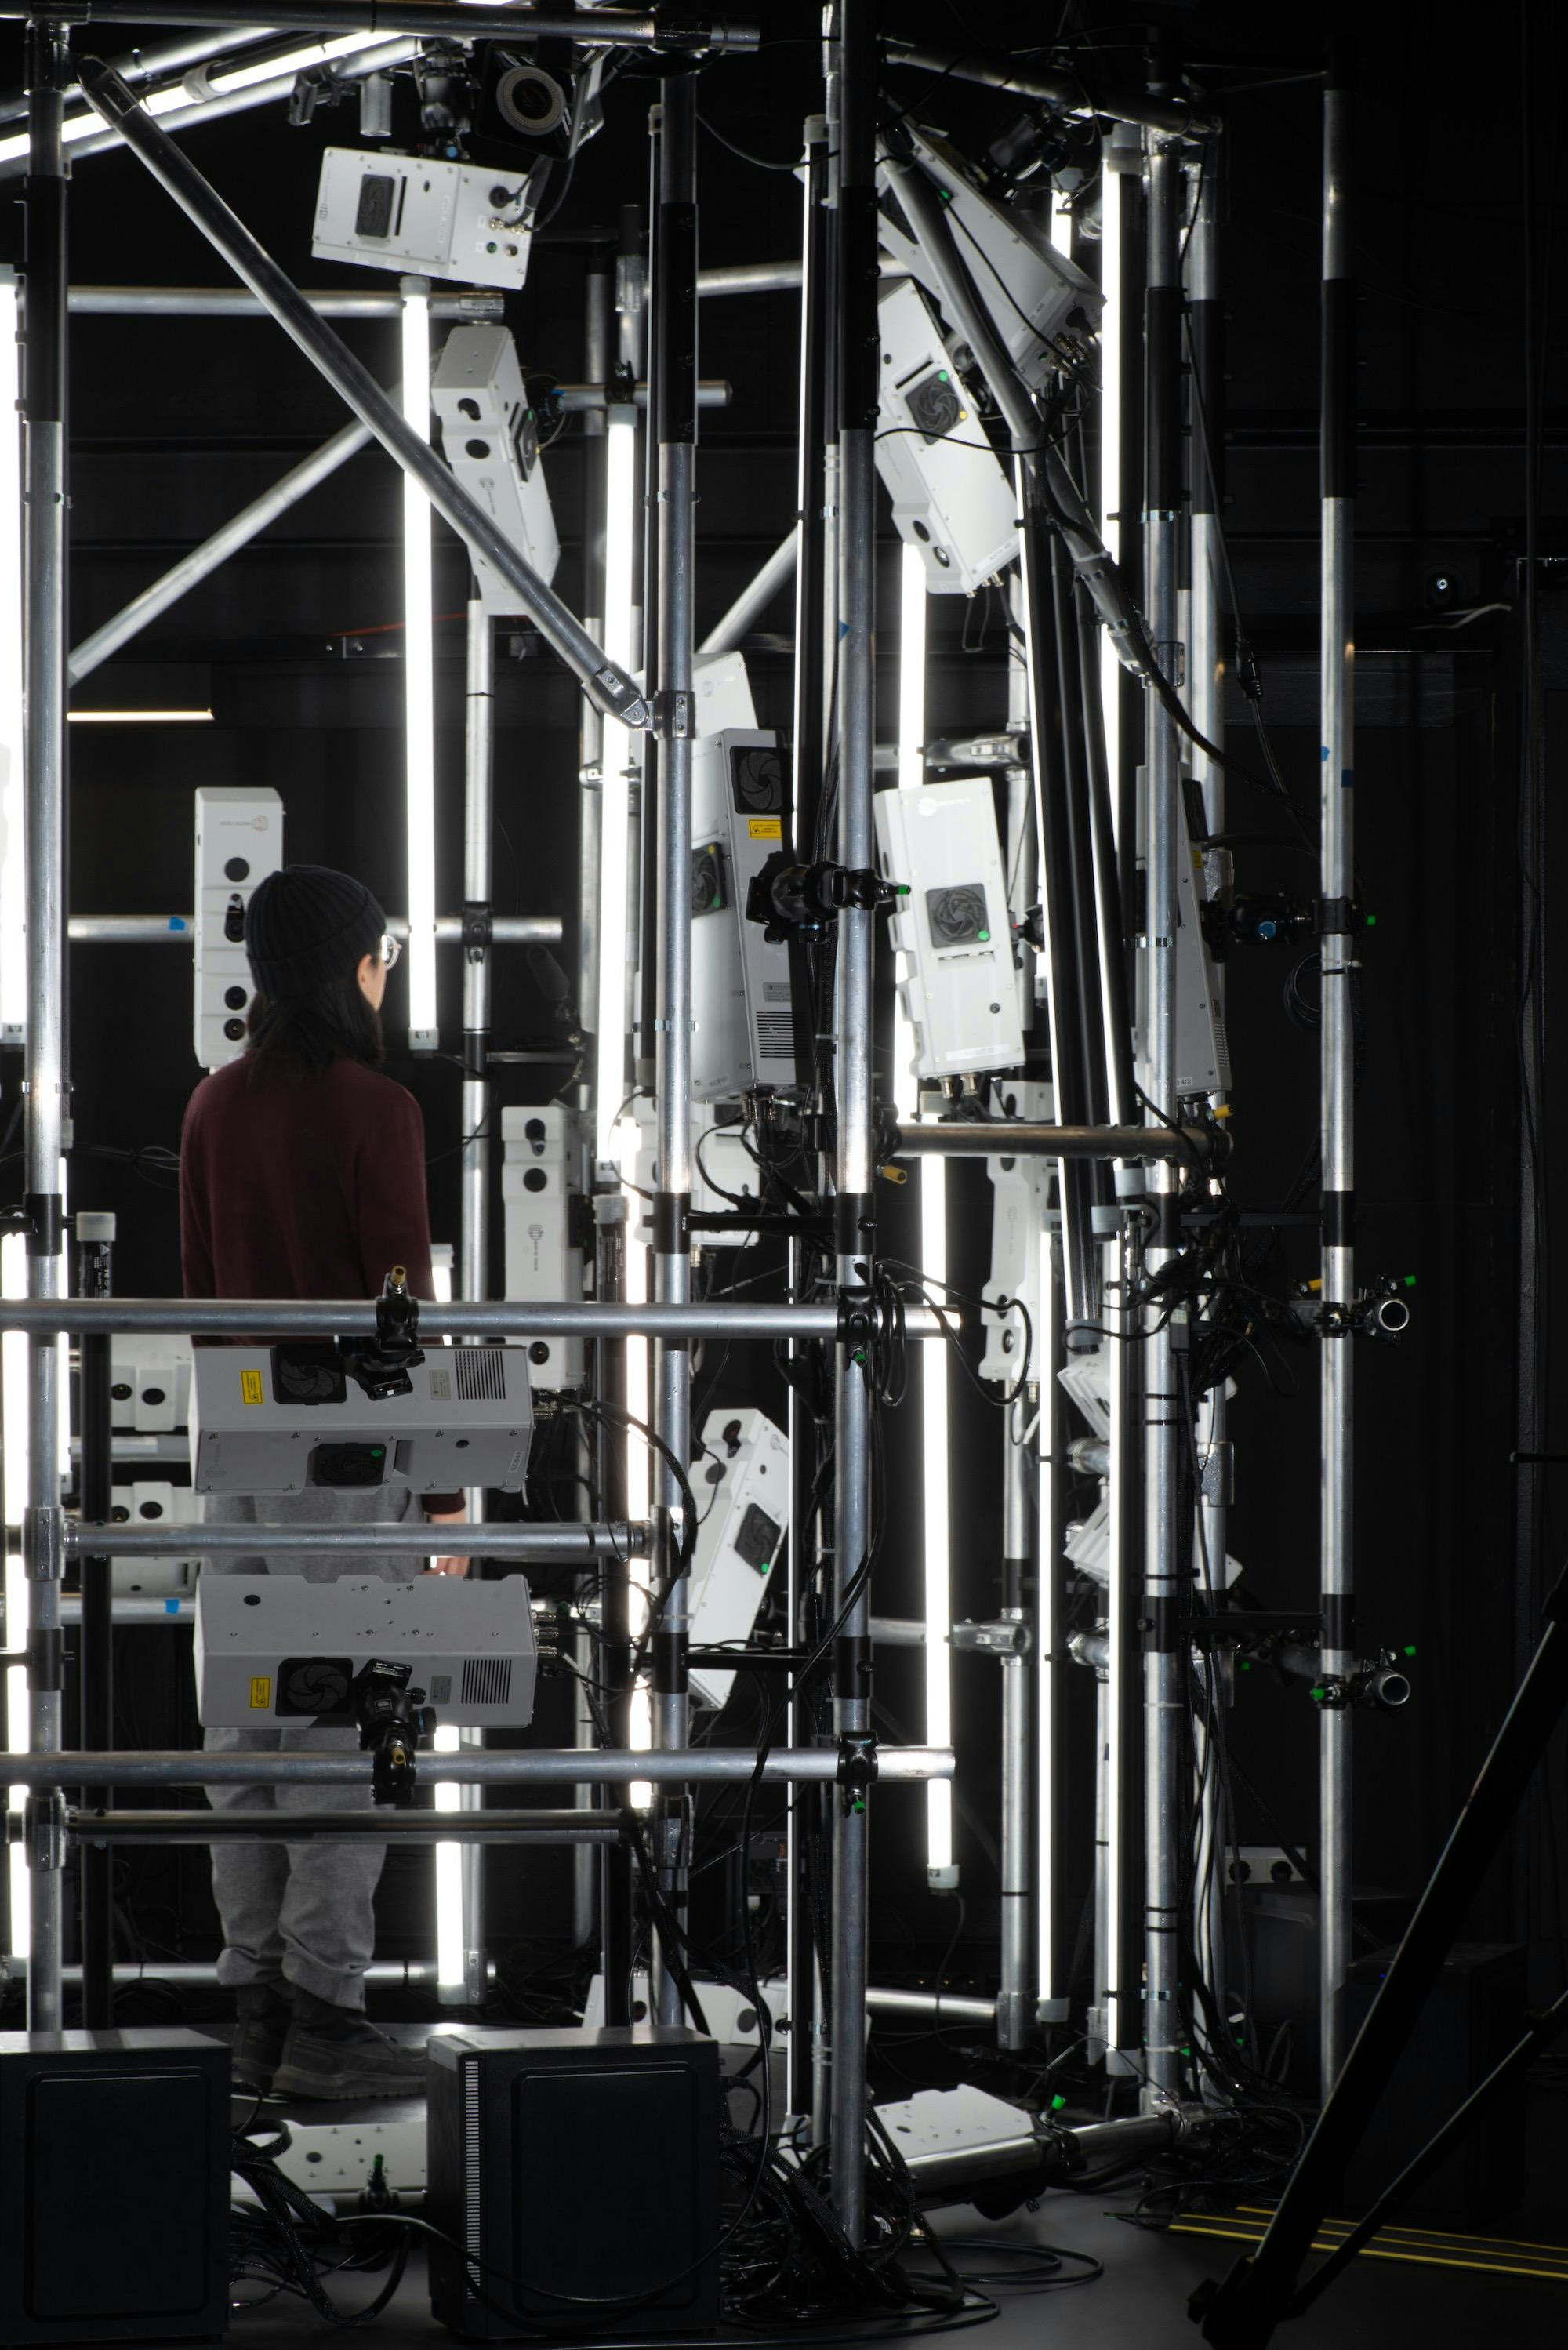 Photograph of a 3D scanning device at CIVIT lab in Tampere University. It shows a steel construction with cameras, with the artist standing on the pedestal in the middle. © Sheung Yiu© Sheung Yiu